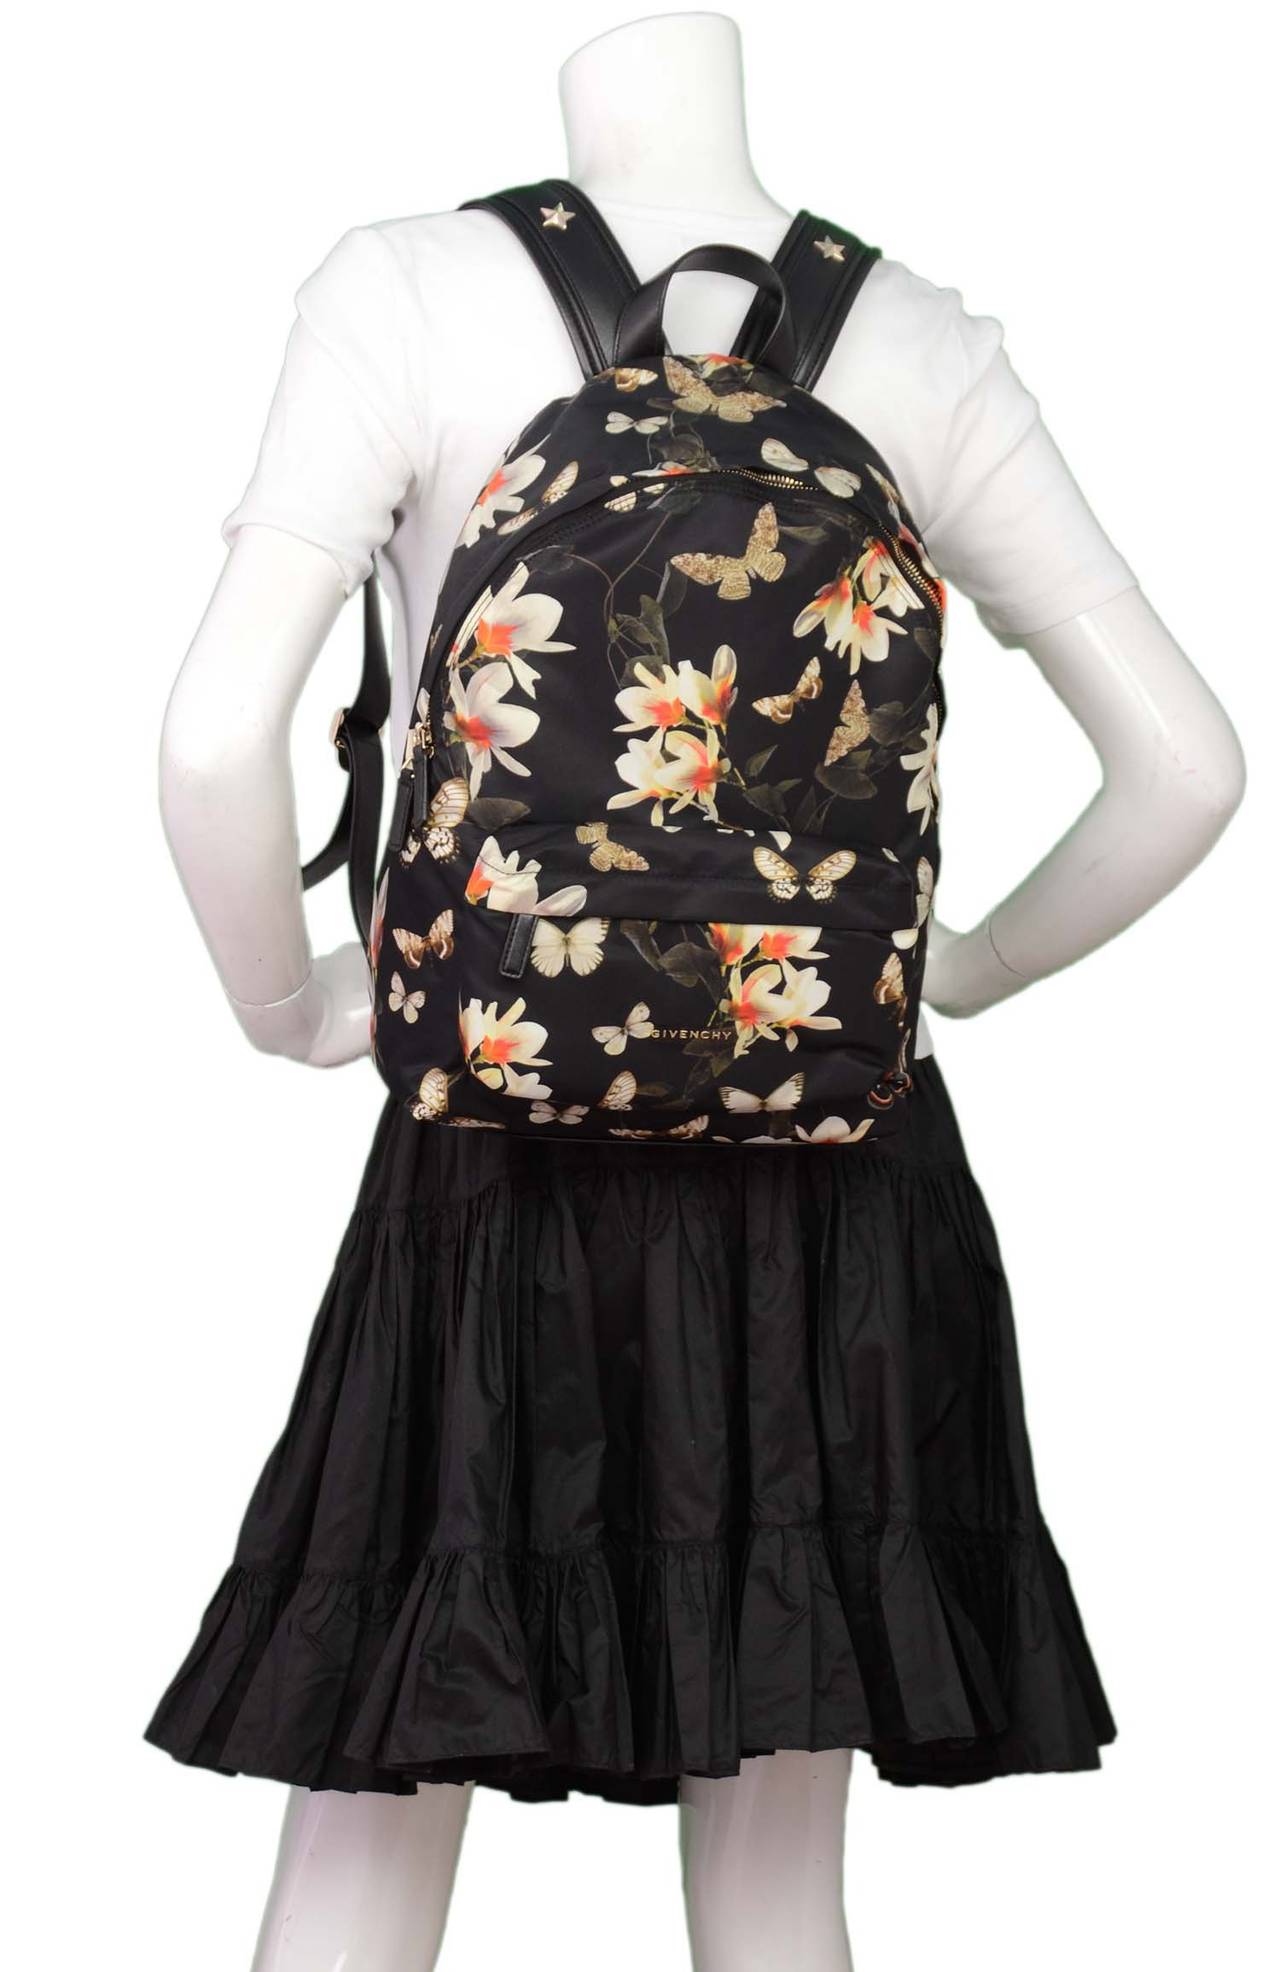 GIVENCHY Floral & Butterfly Print Black Nylon Backpack rt $1, 320 3